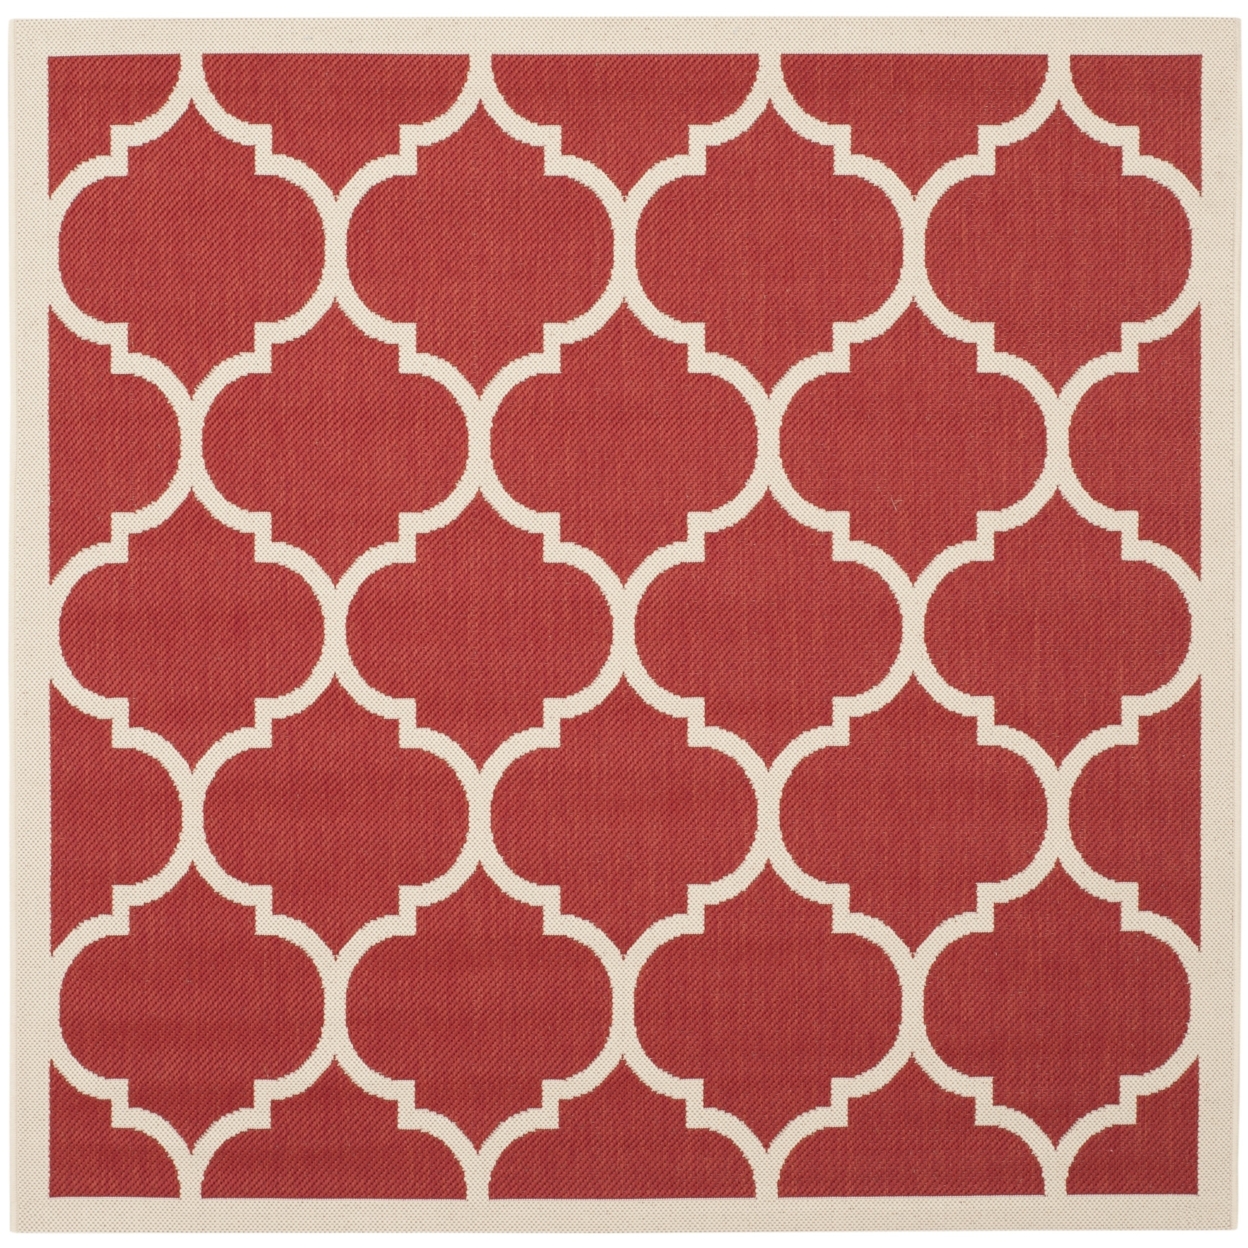 SAFAVIEH Outdoor CY6914-248 Courtyard Collection Red / Bone Rug - 5' 3 Square